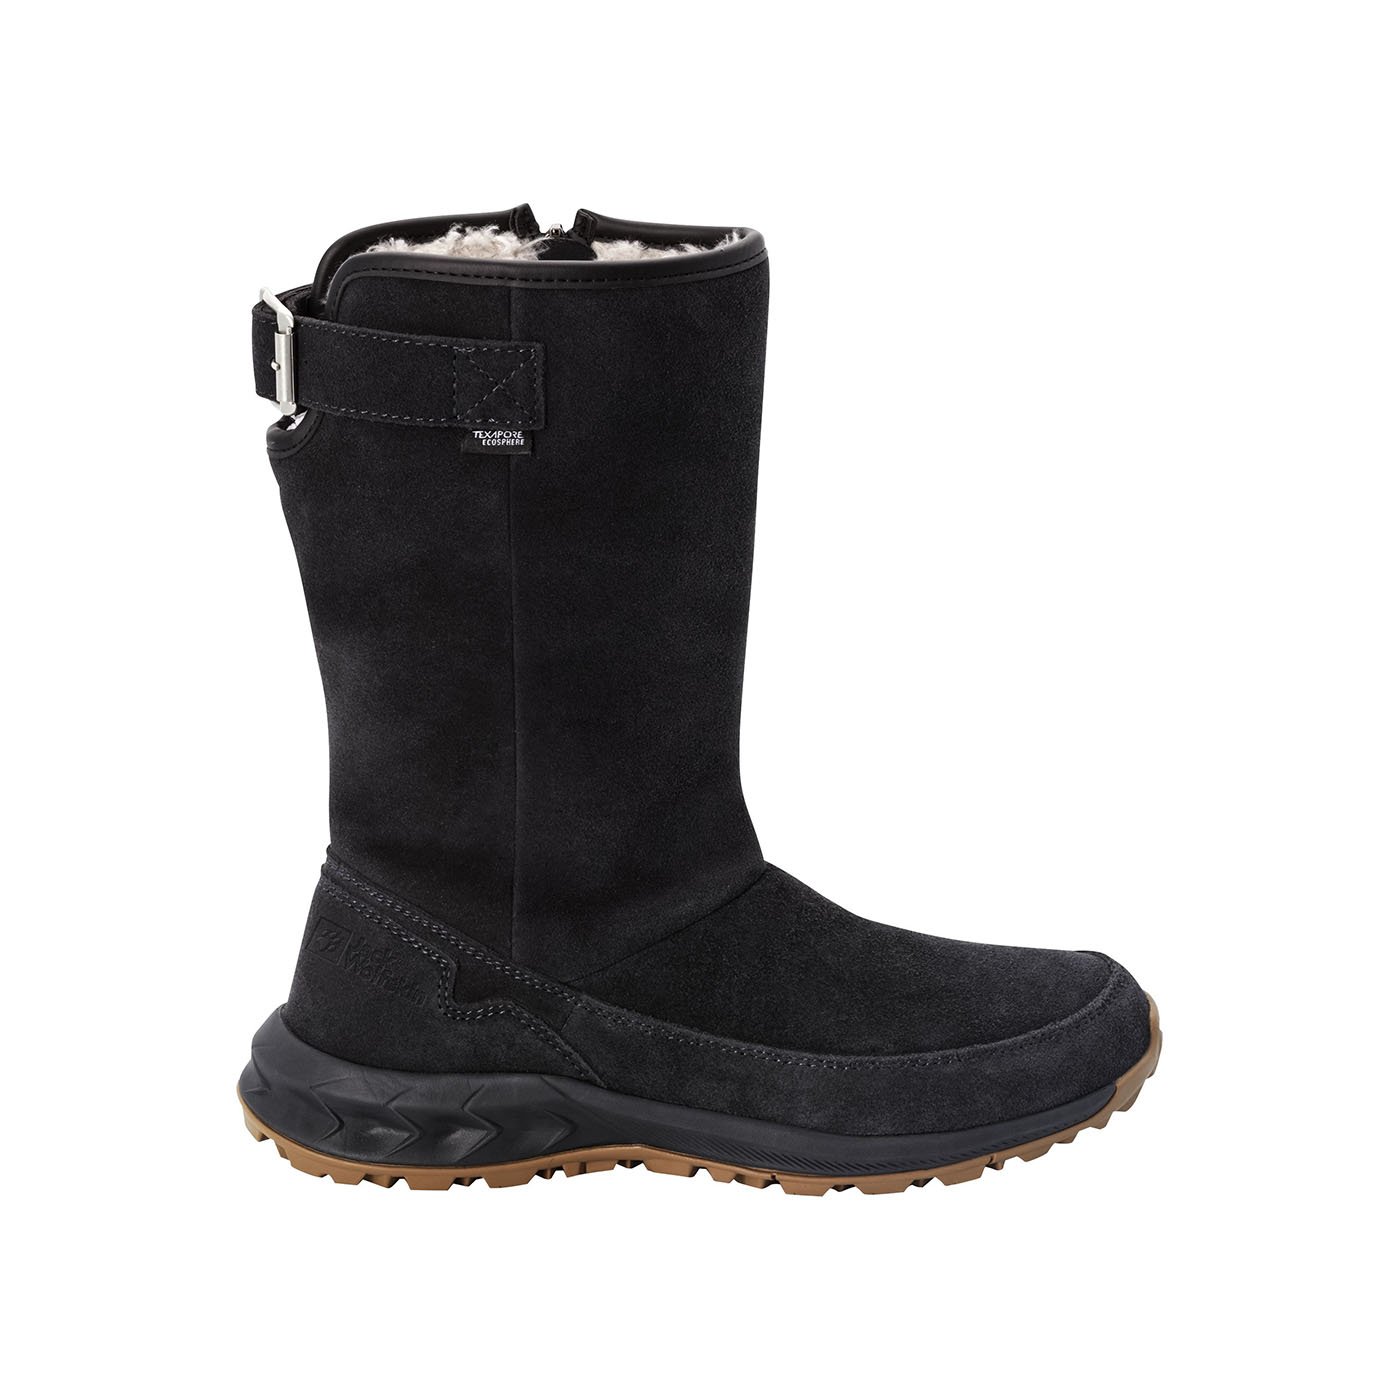 QUEENSTOWN TEXAPORE BOOT H W - Antrasit - 1